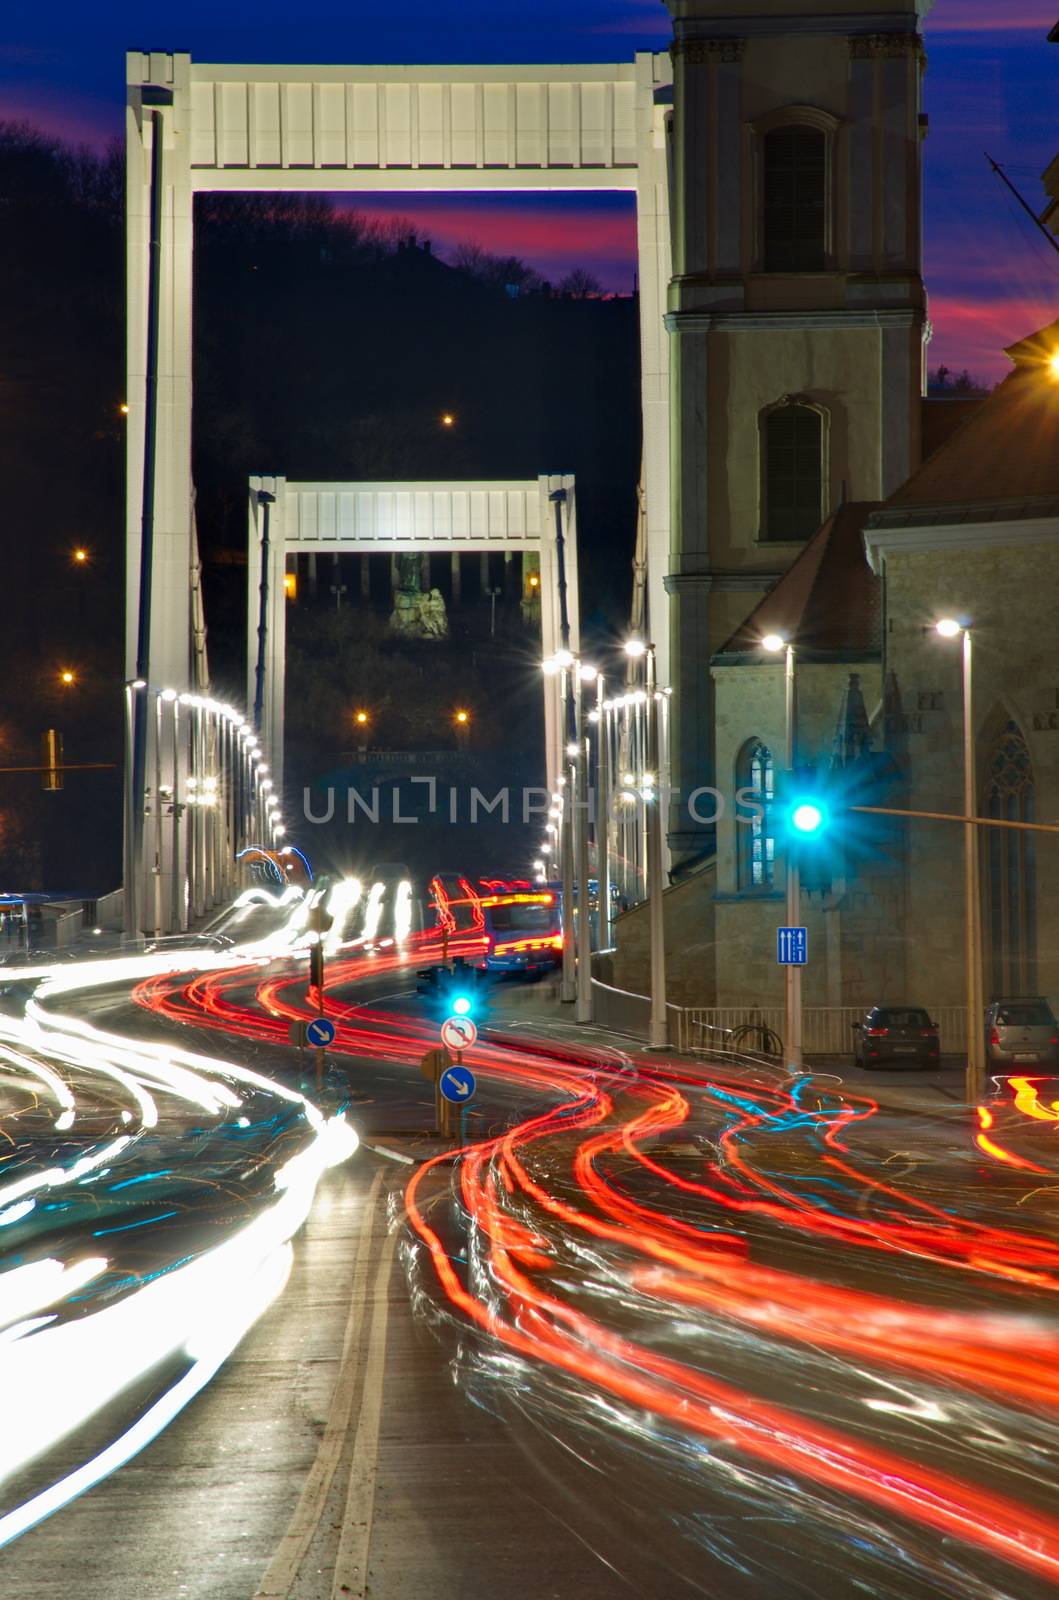 Traffic on the bridge at night in Budapest, Hungary by anderm